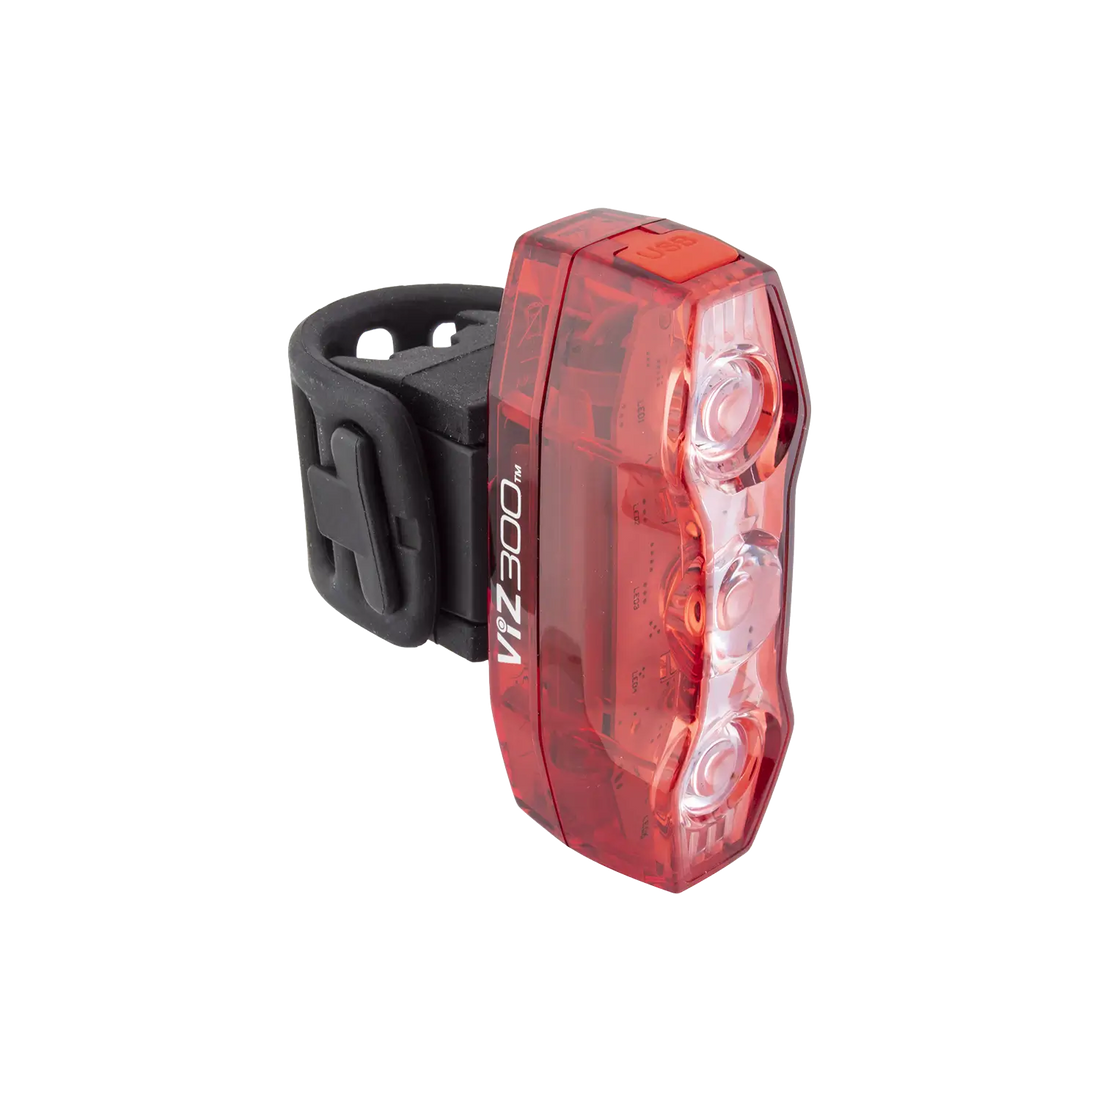 CATEYE safety light-rechargeable